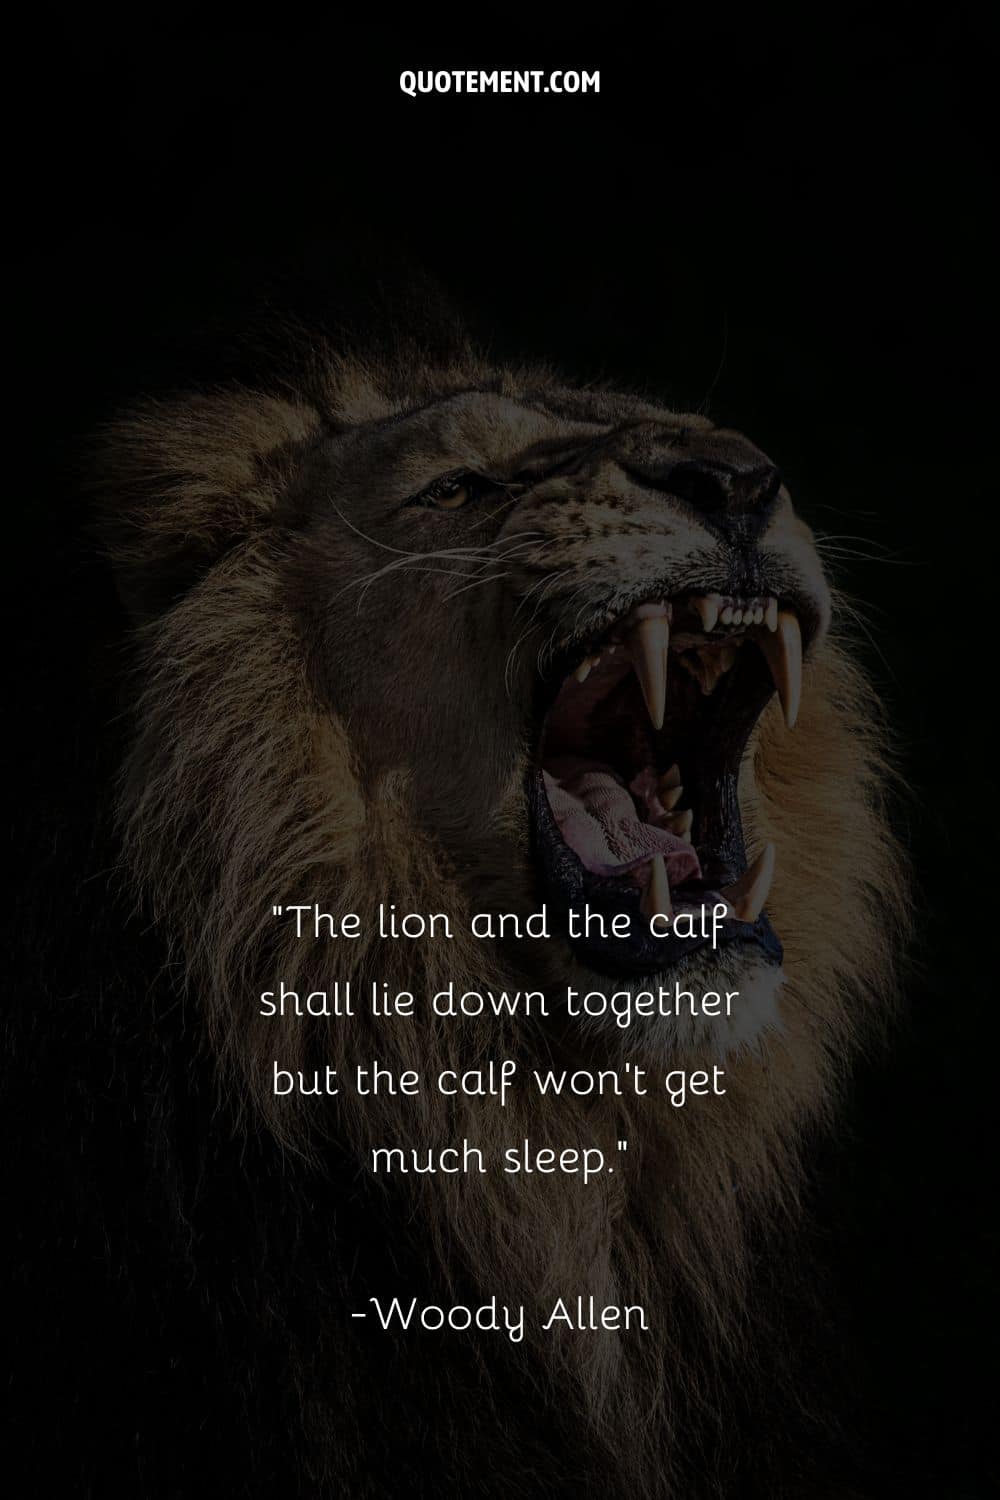 The lion and the calf shall lie down together but the calf won’t get much sleep